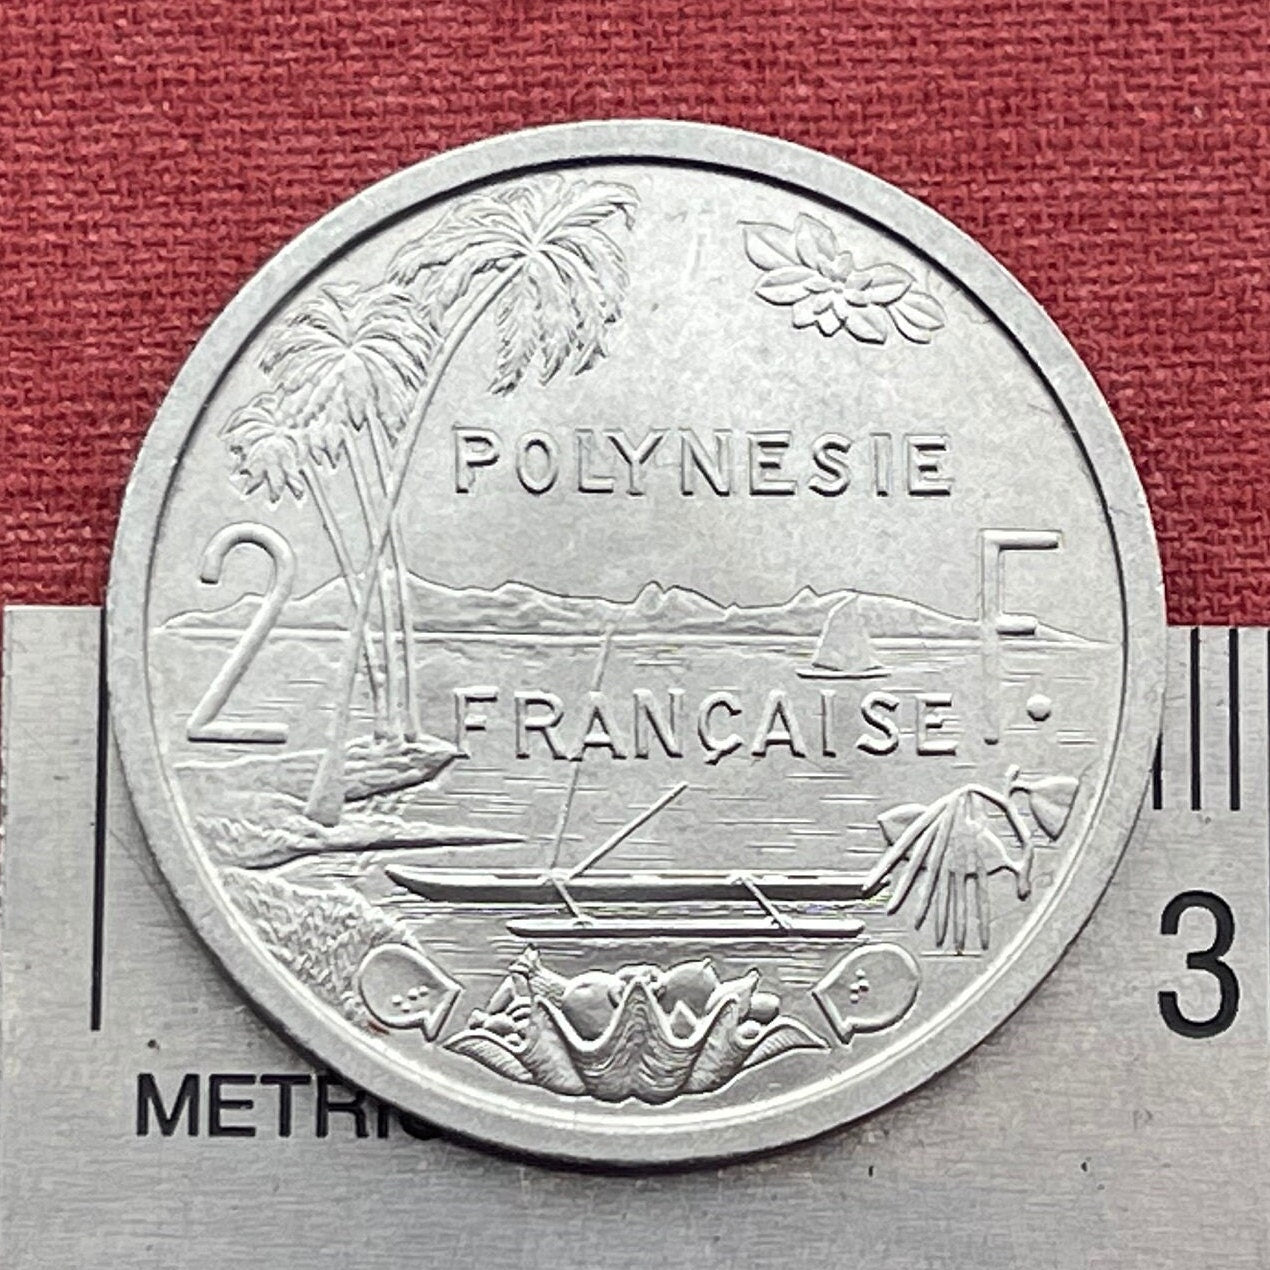 Liberty on Throne 2 Francs & Tahiti Beach, Outrigger Canoe, Sailboat French Polynesia Authentic Coin (South Pacific Island) 1965 (Marquesas)